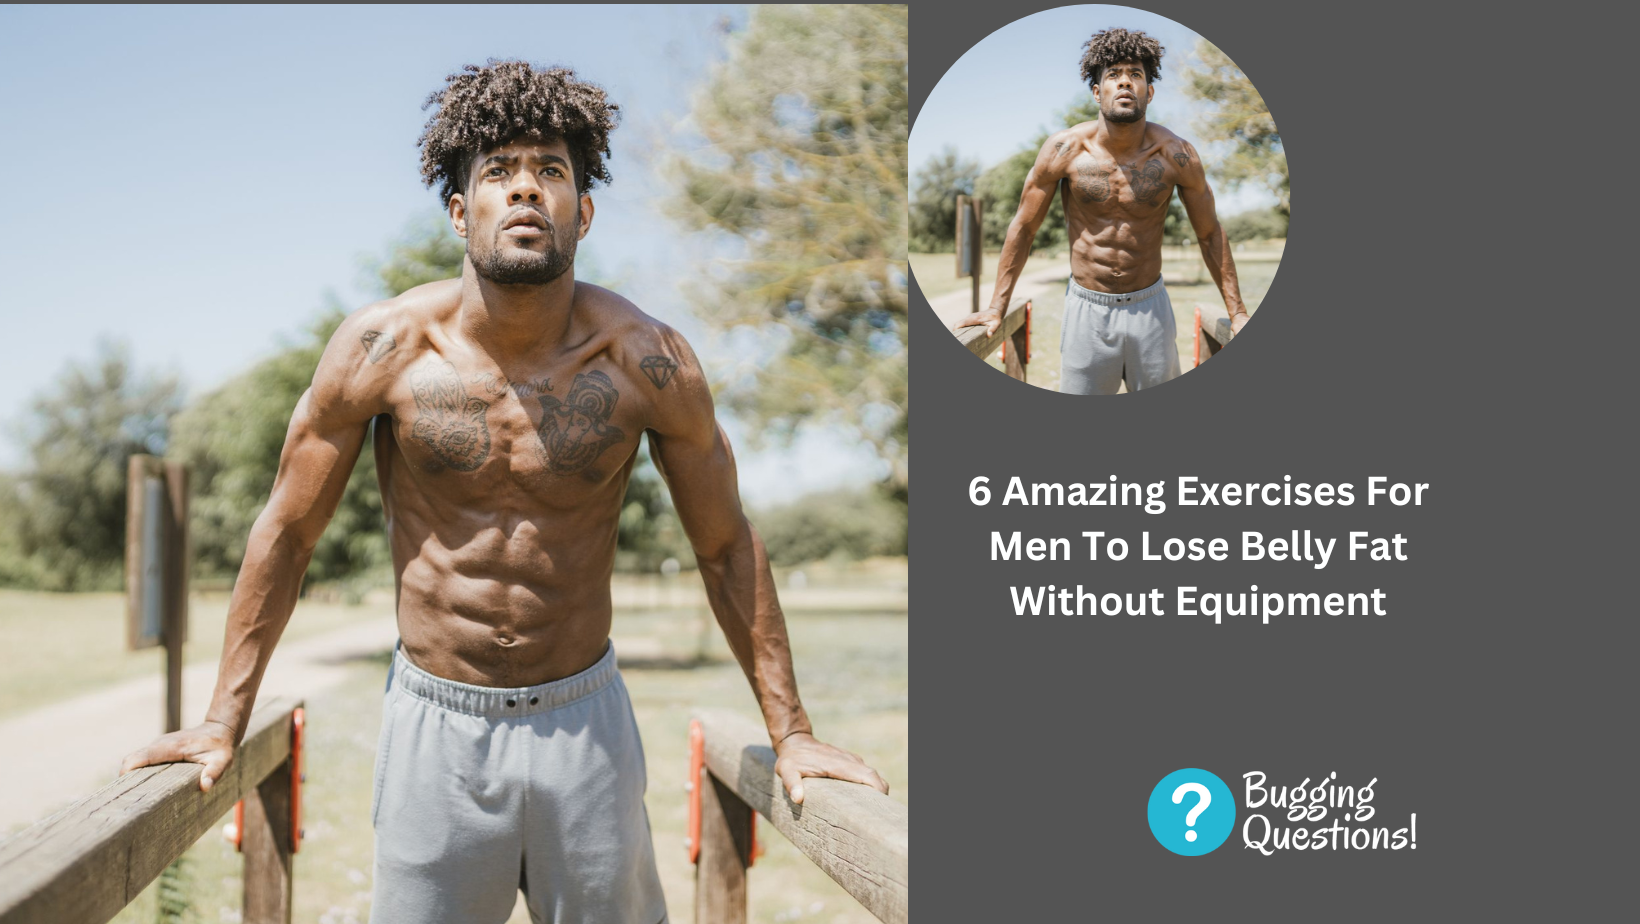 6 Amazing Exercises For Men To Lose Belly Fat Without Equipment- Here Is What To Know